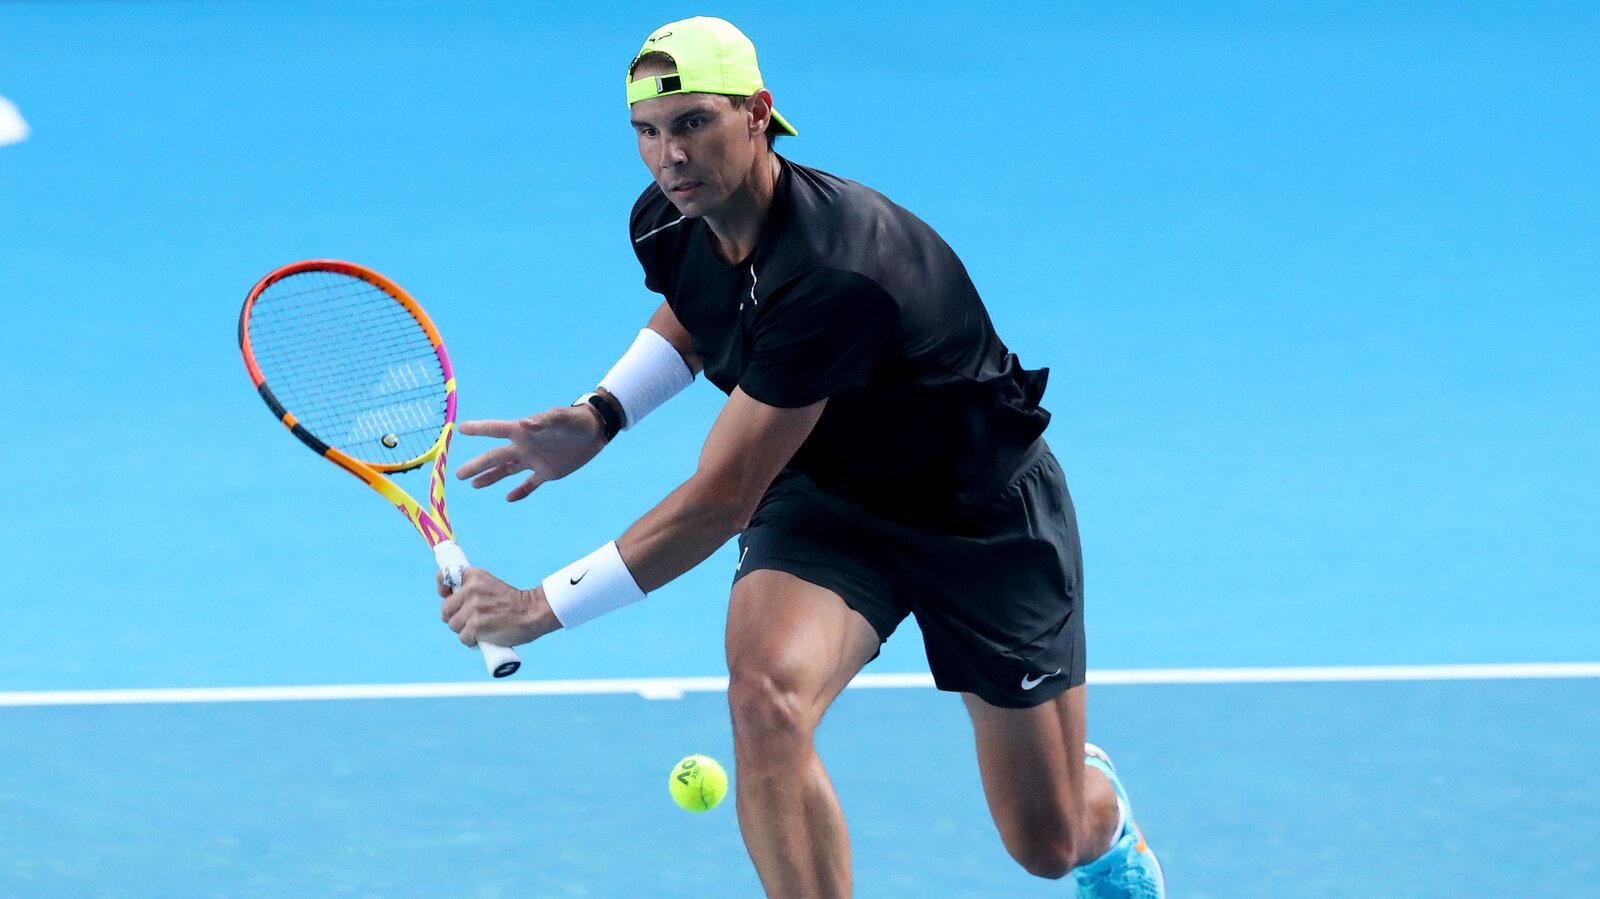 With the Australian Open Set to Begin All Eyes Are on Rafael